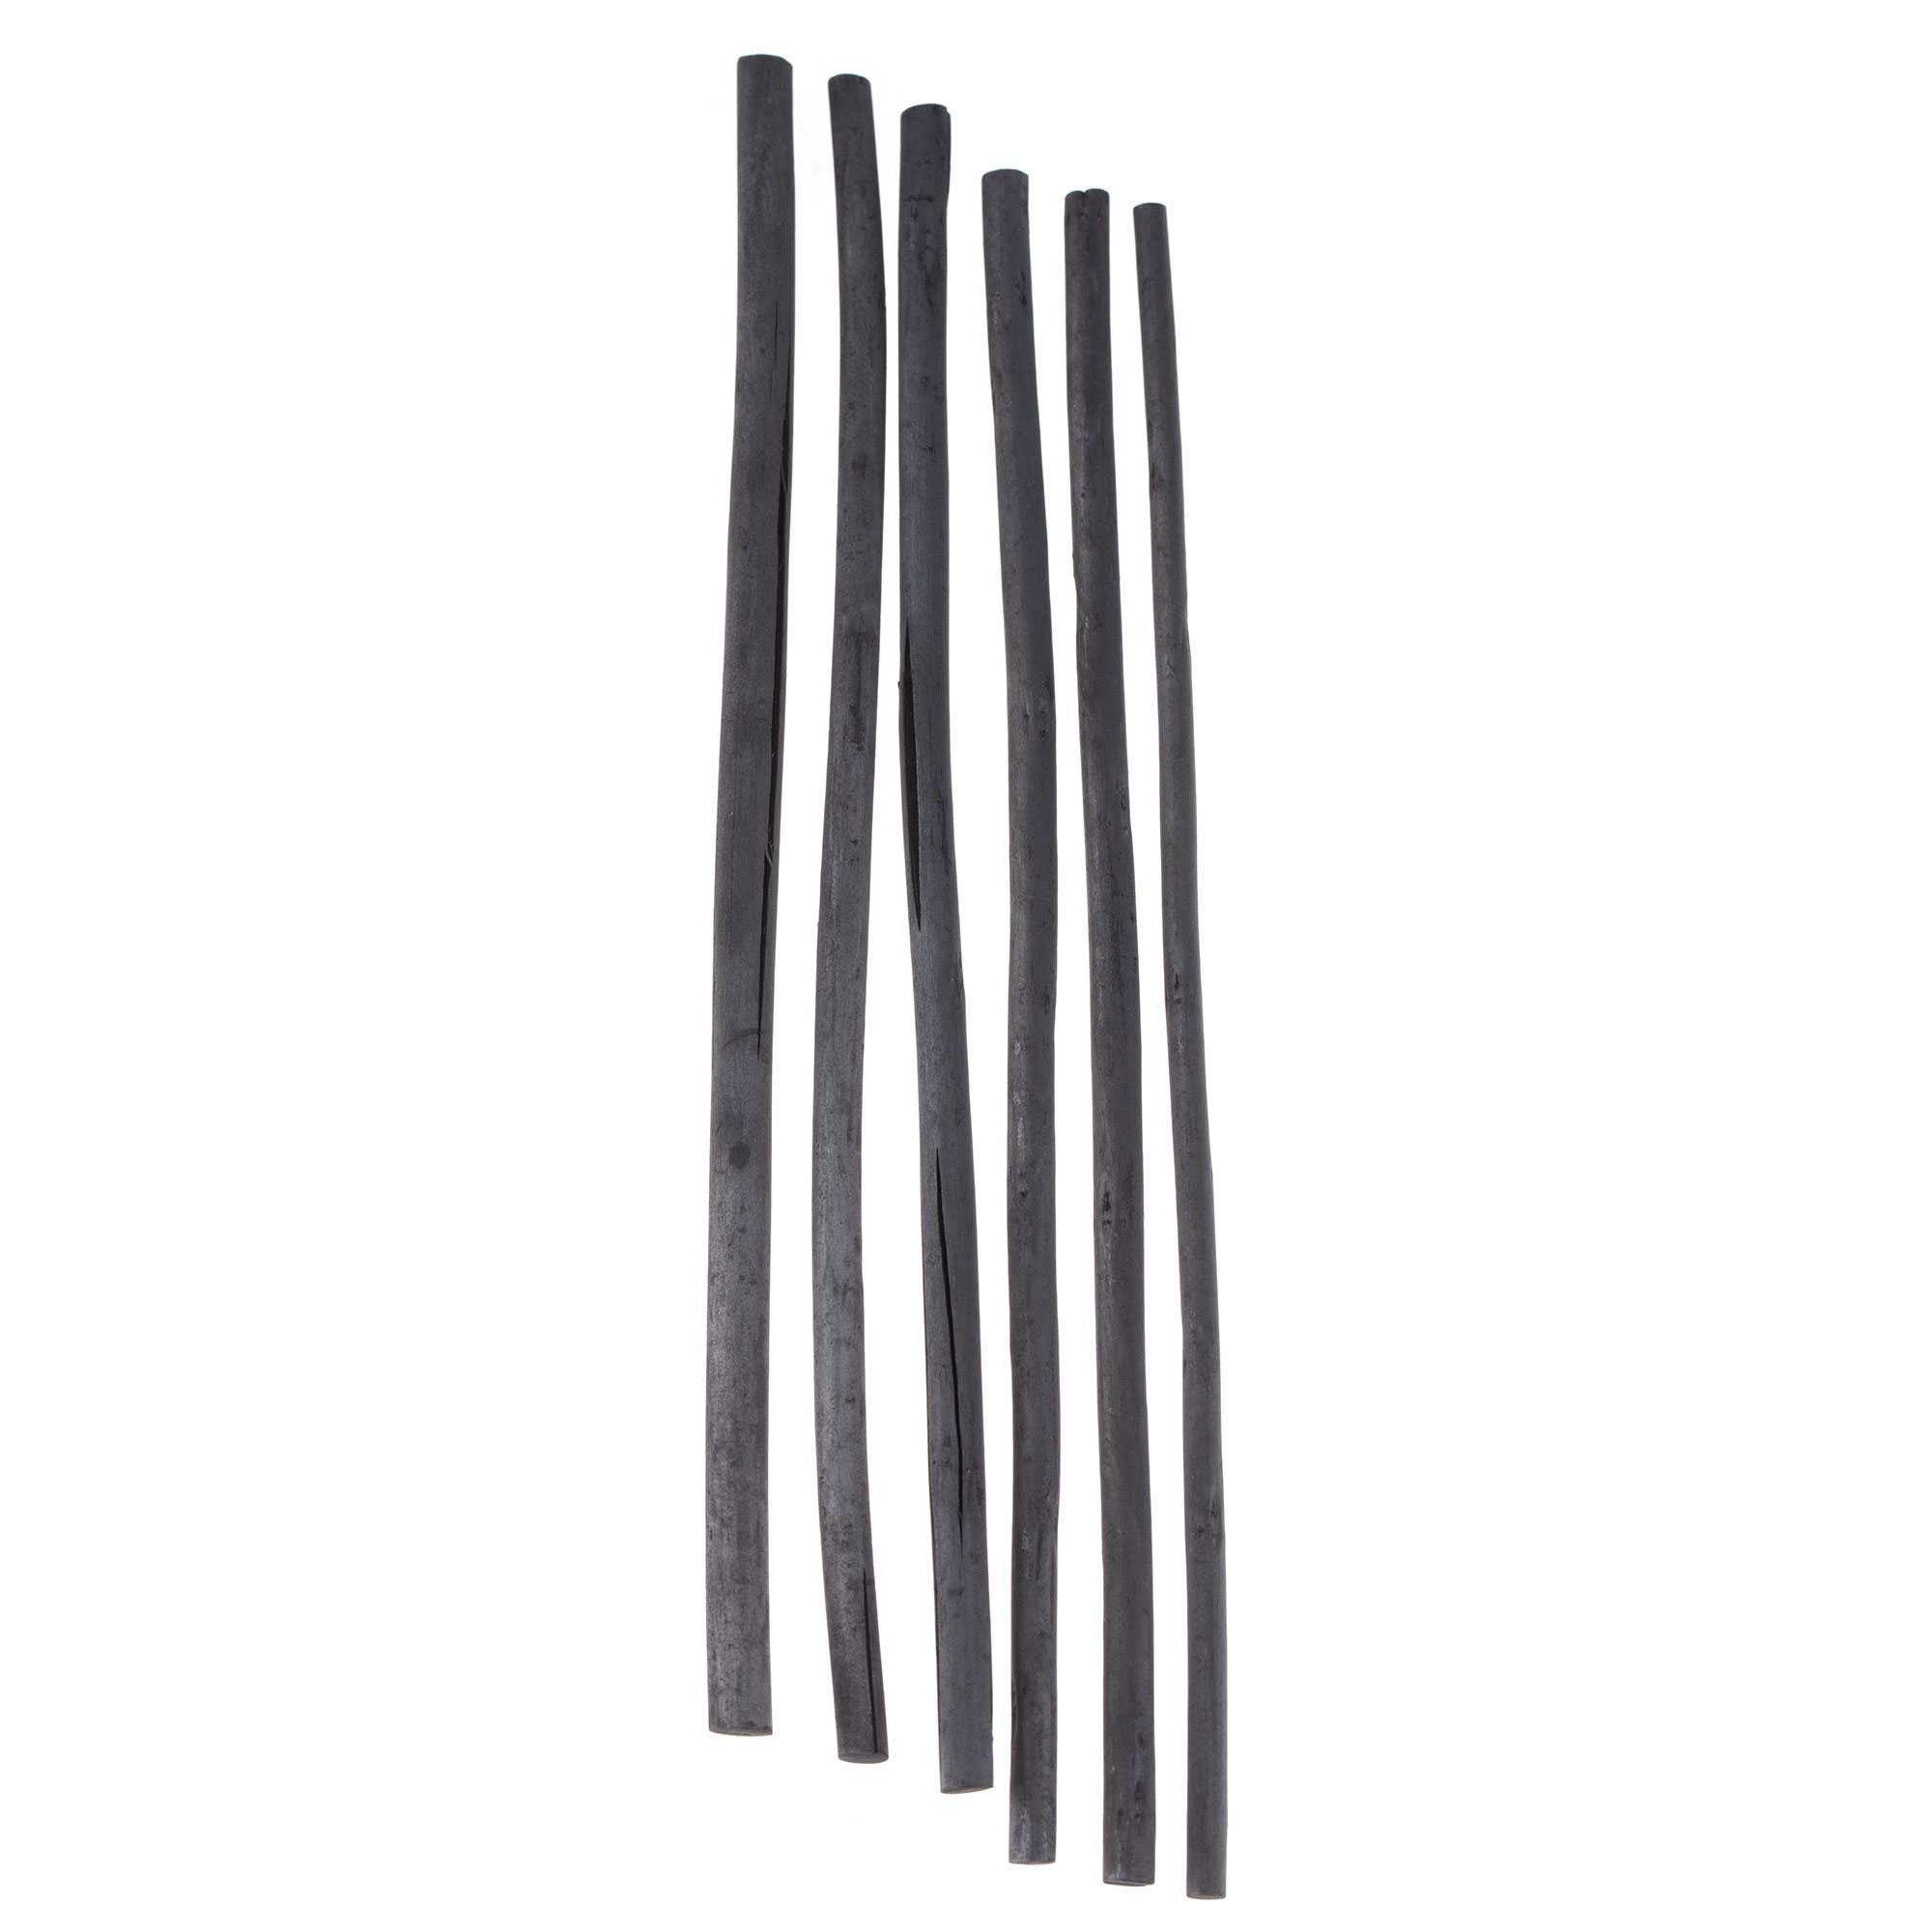 Jack Richeson Extra Soft Thin Vine Charcoal Sticks Black Pack of 25